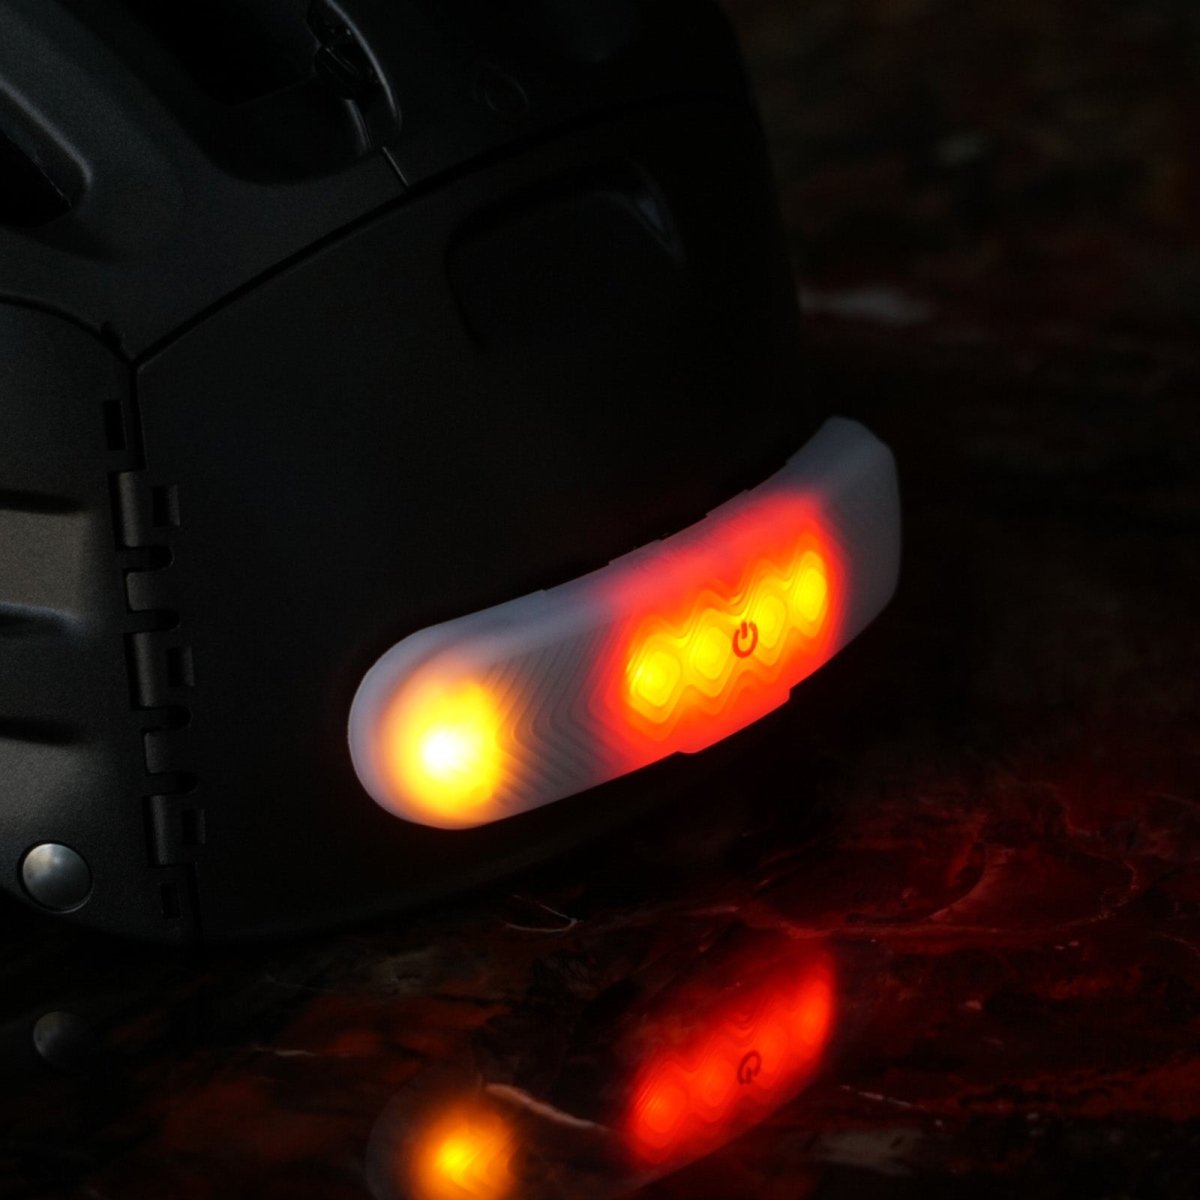 BLINXI - Removable flashing bicycle and scooter helmet lighting